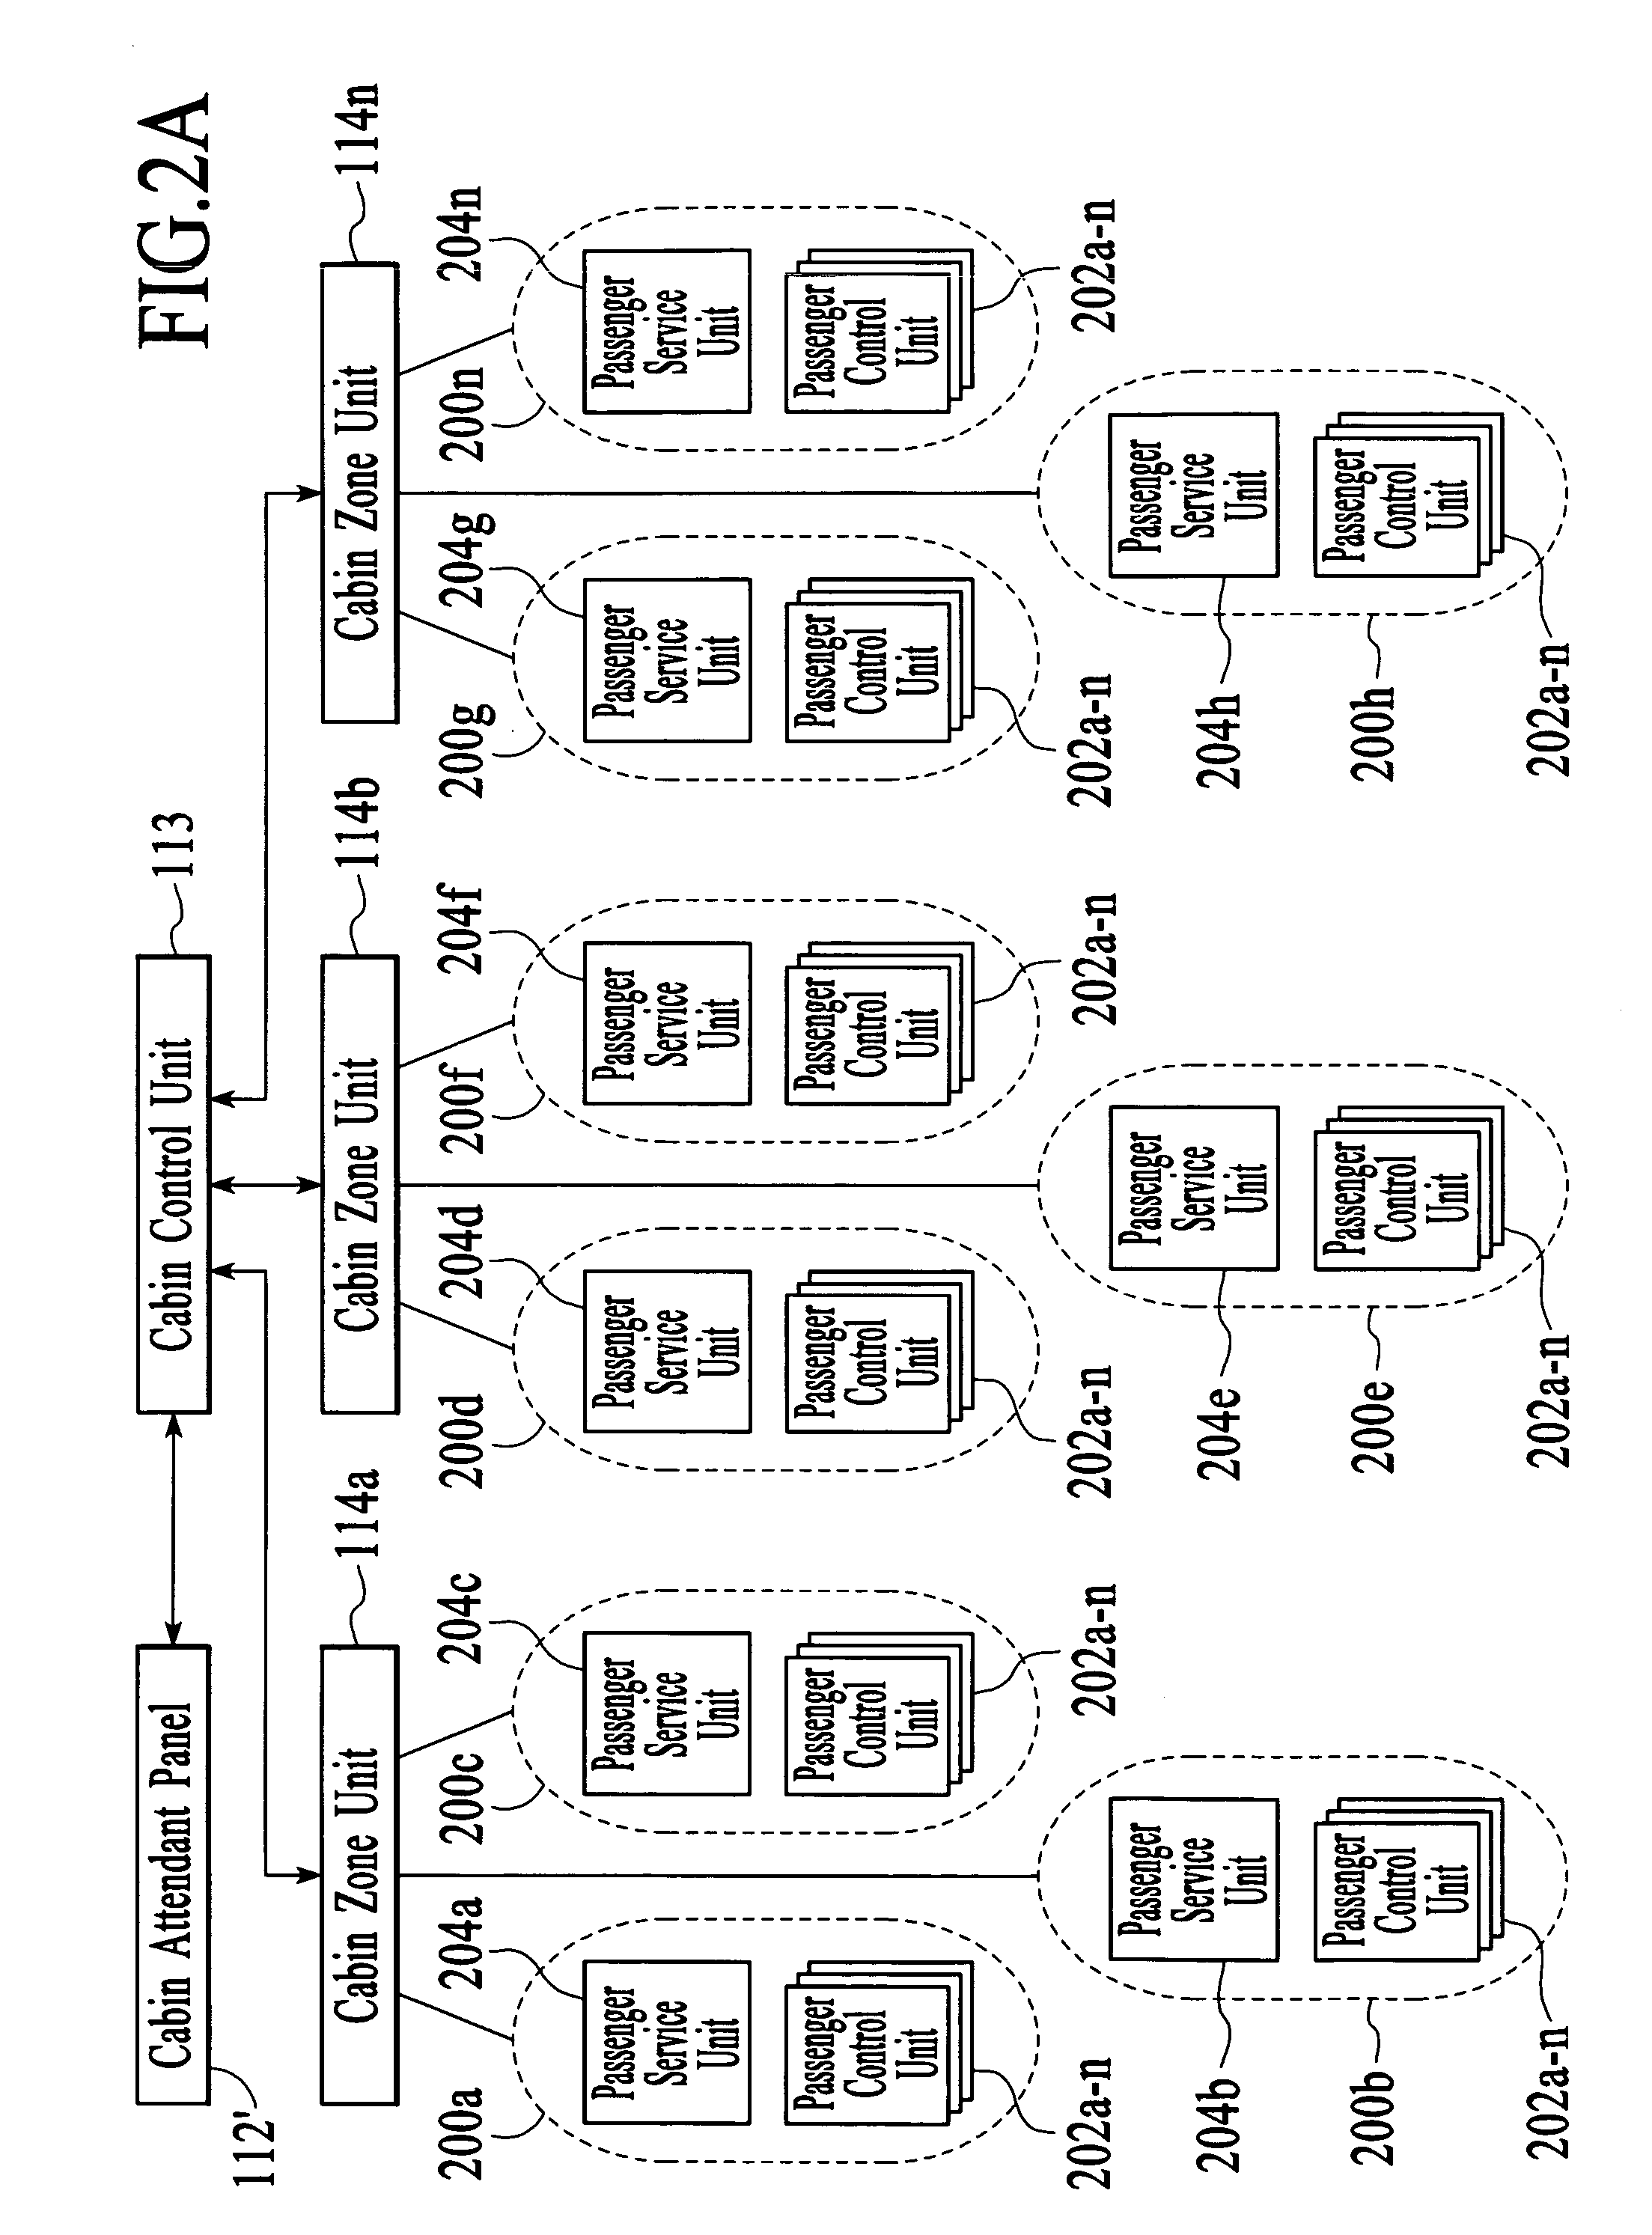 Simplified power system for a cabin services system for an aircraft